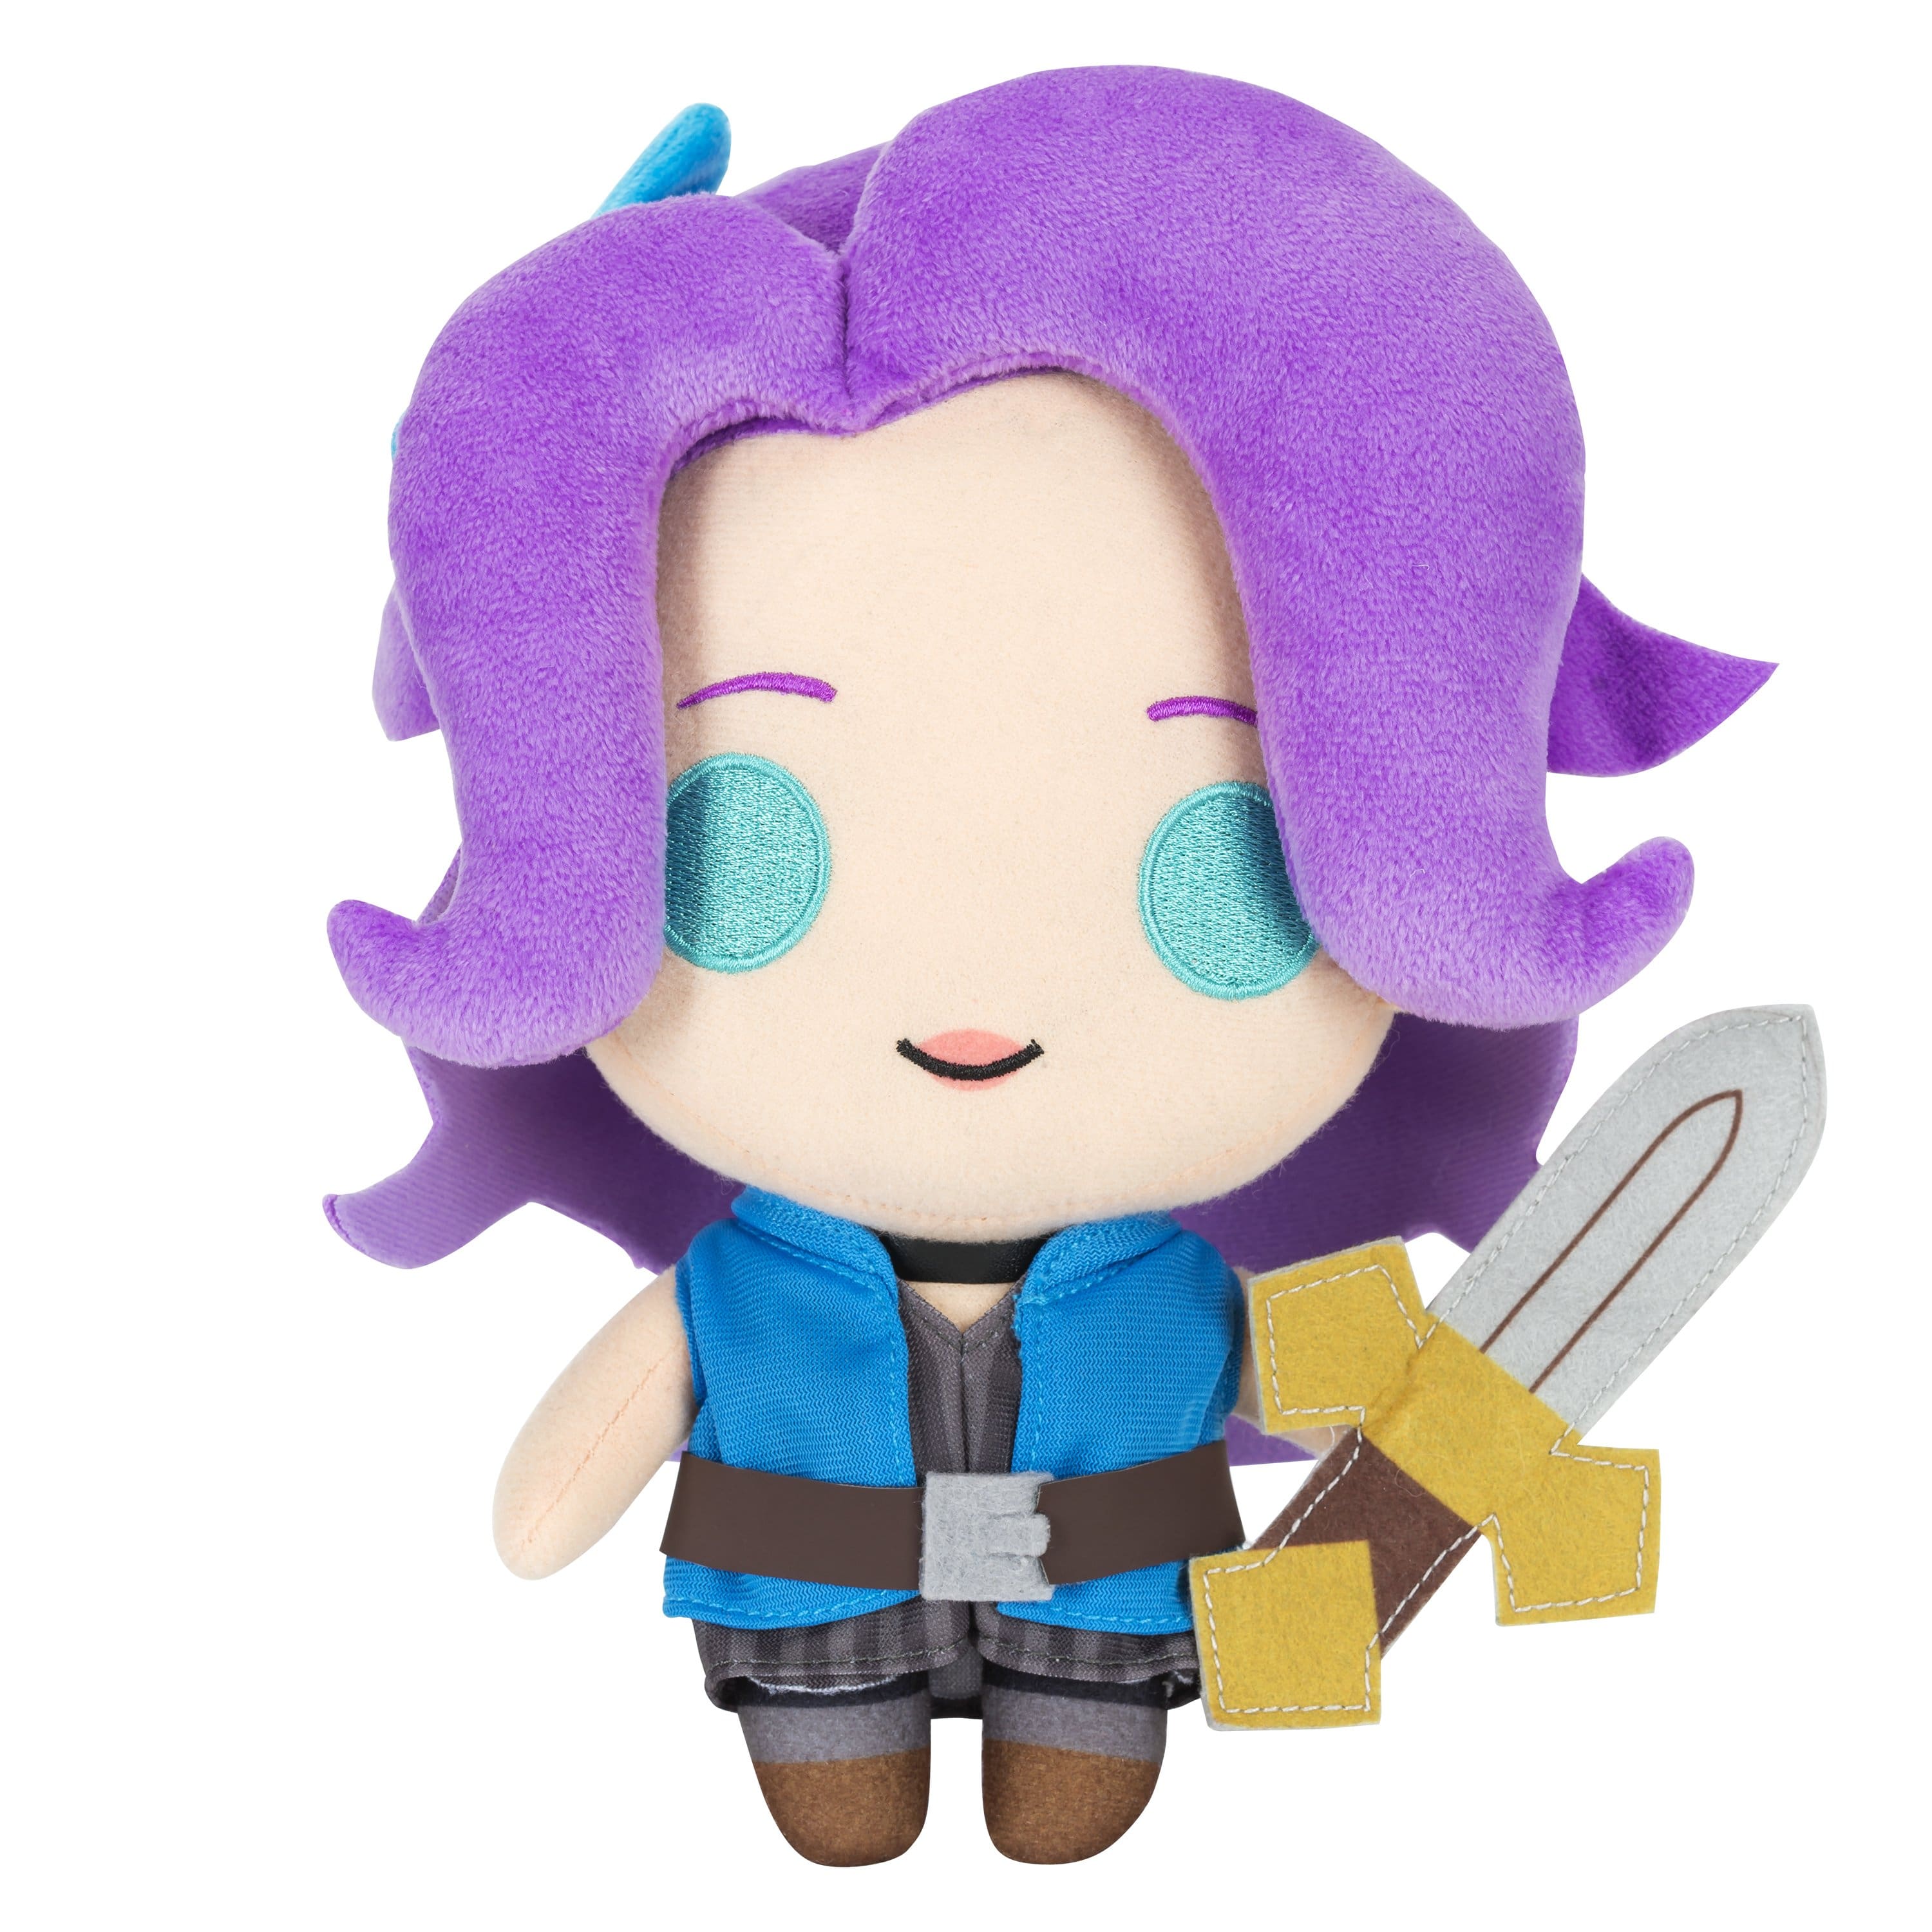 Stardew Valley - 10" Abigail Collector's Stuffed Plush Front View With Sword